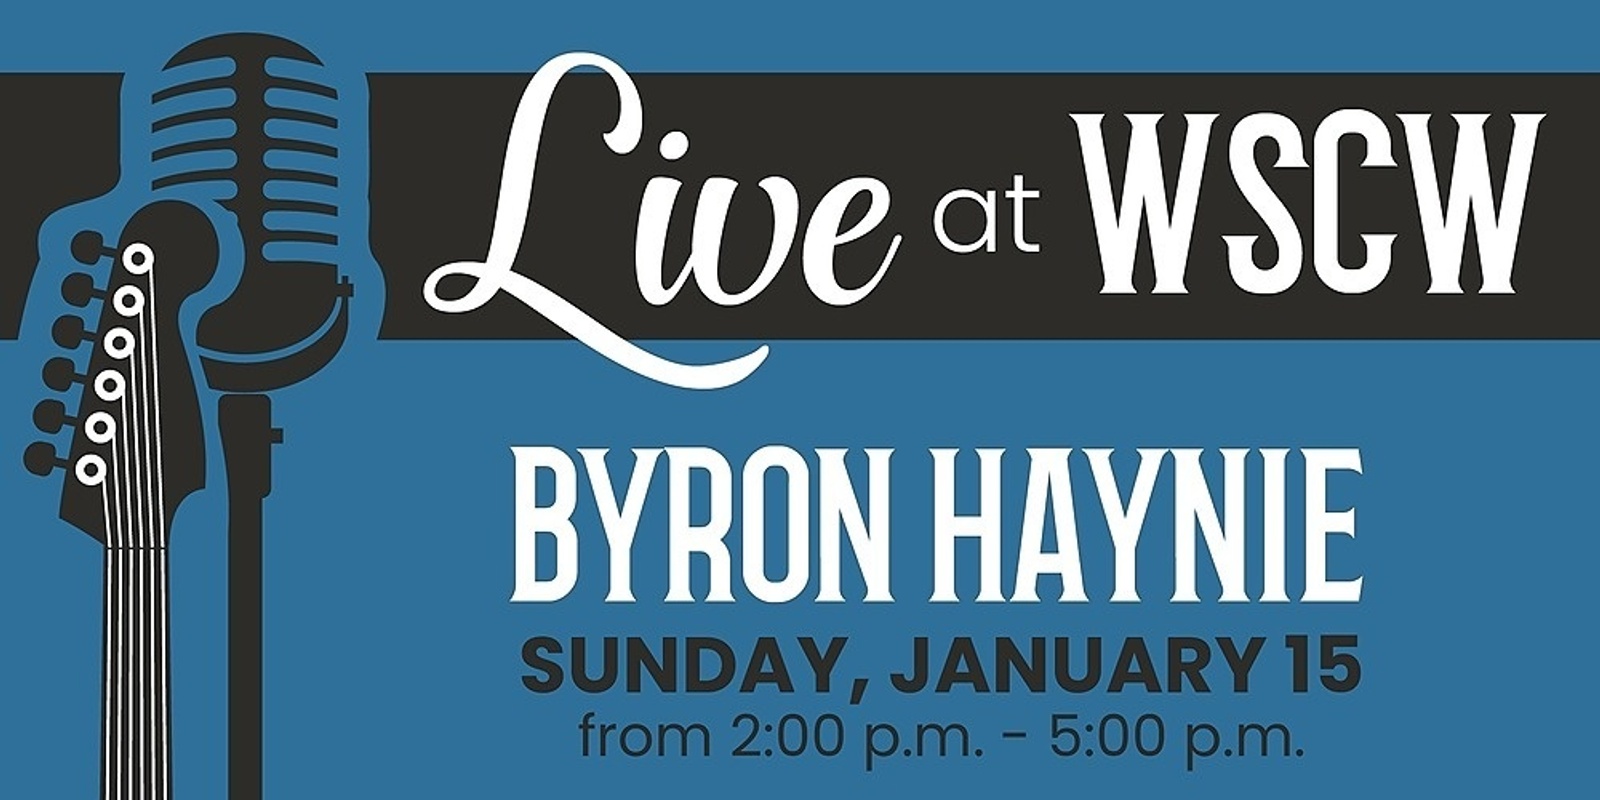 Banner image for Byron Haynie Live at WSCW January 15